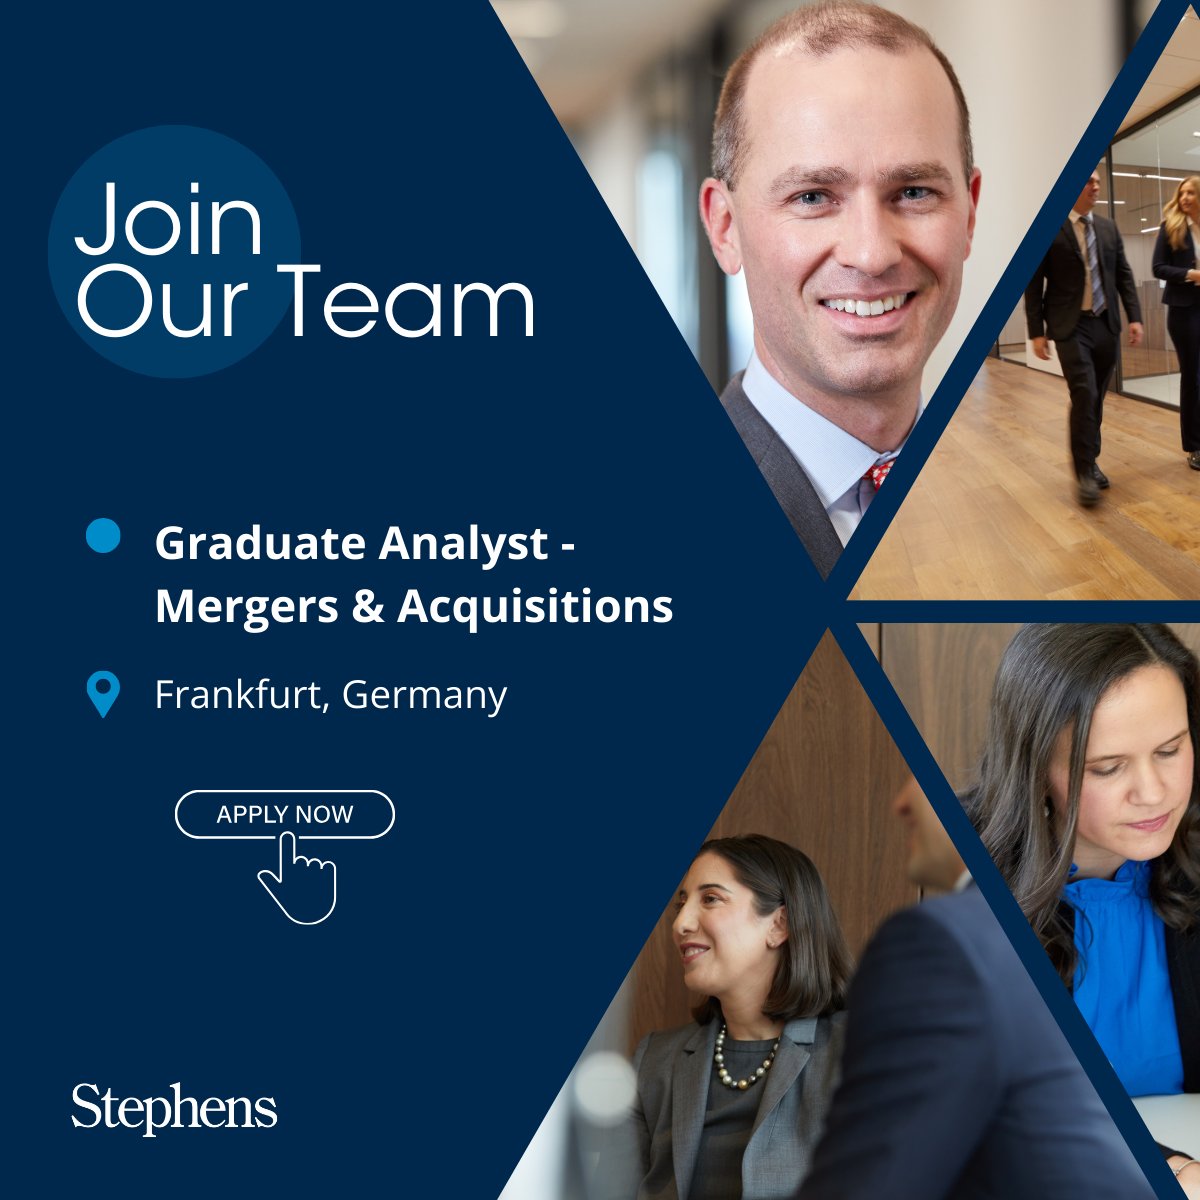 Our Frankfurt office is hiring an Analyst – Mergers & Acquisitions. As part of our transatlantic team, you’ll support live transactions, develop marketing materials, and conduct market research. Apply today: stephens.com/careers/studen…